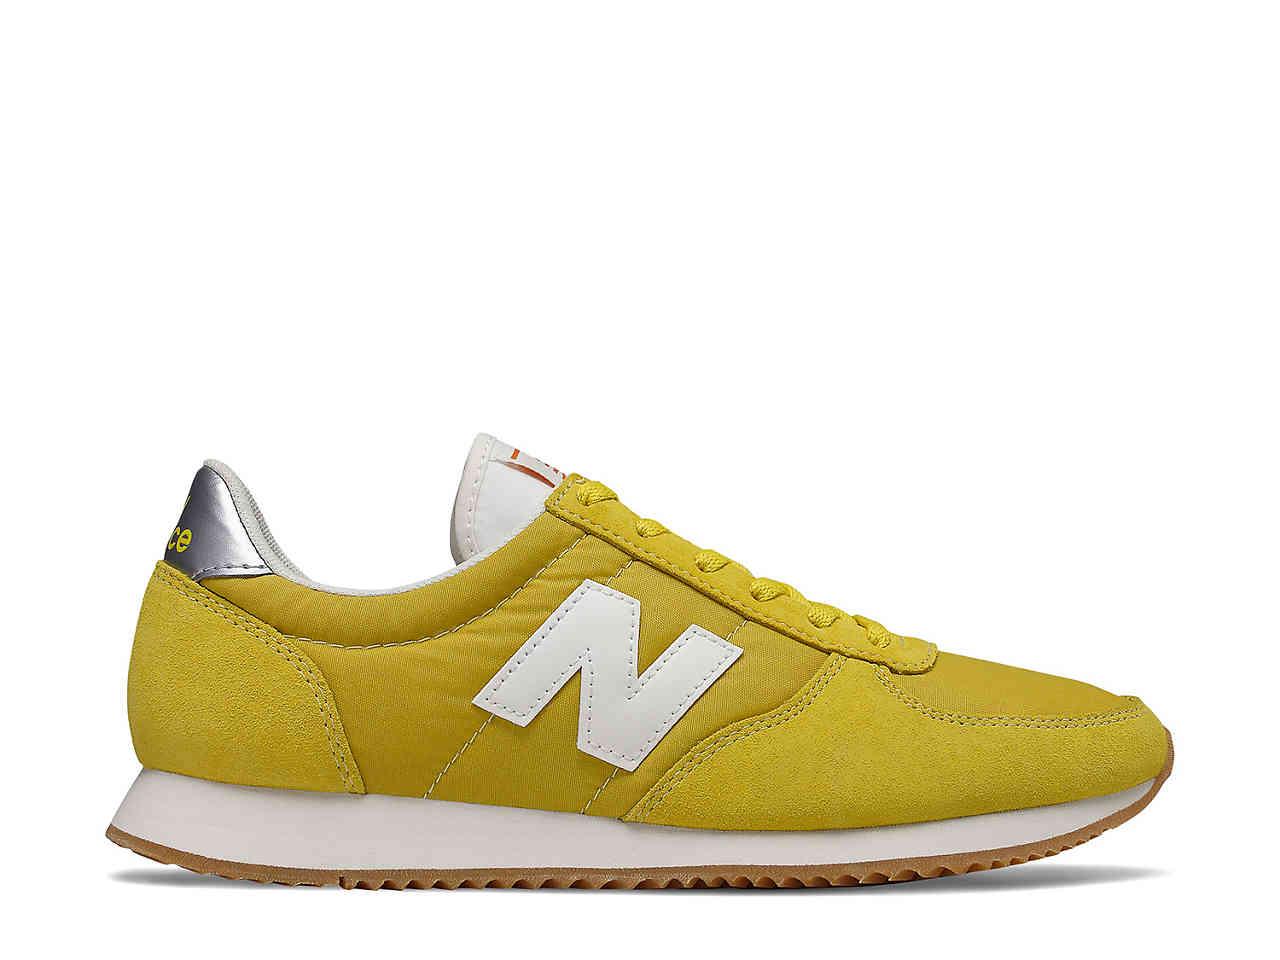 New Balance Suede 220 Sneaker in Mustard Yellow/White (Yellow) - Lyst